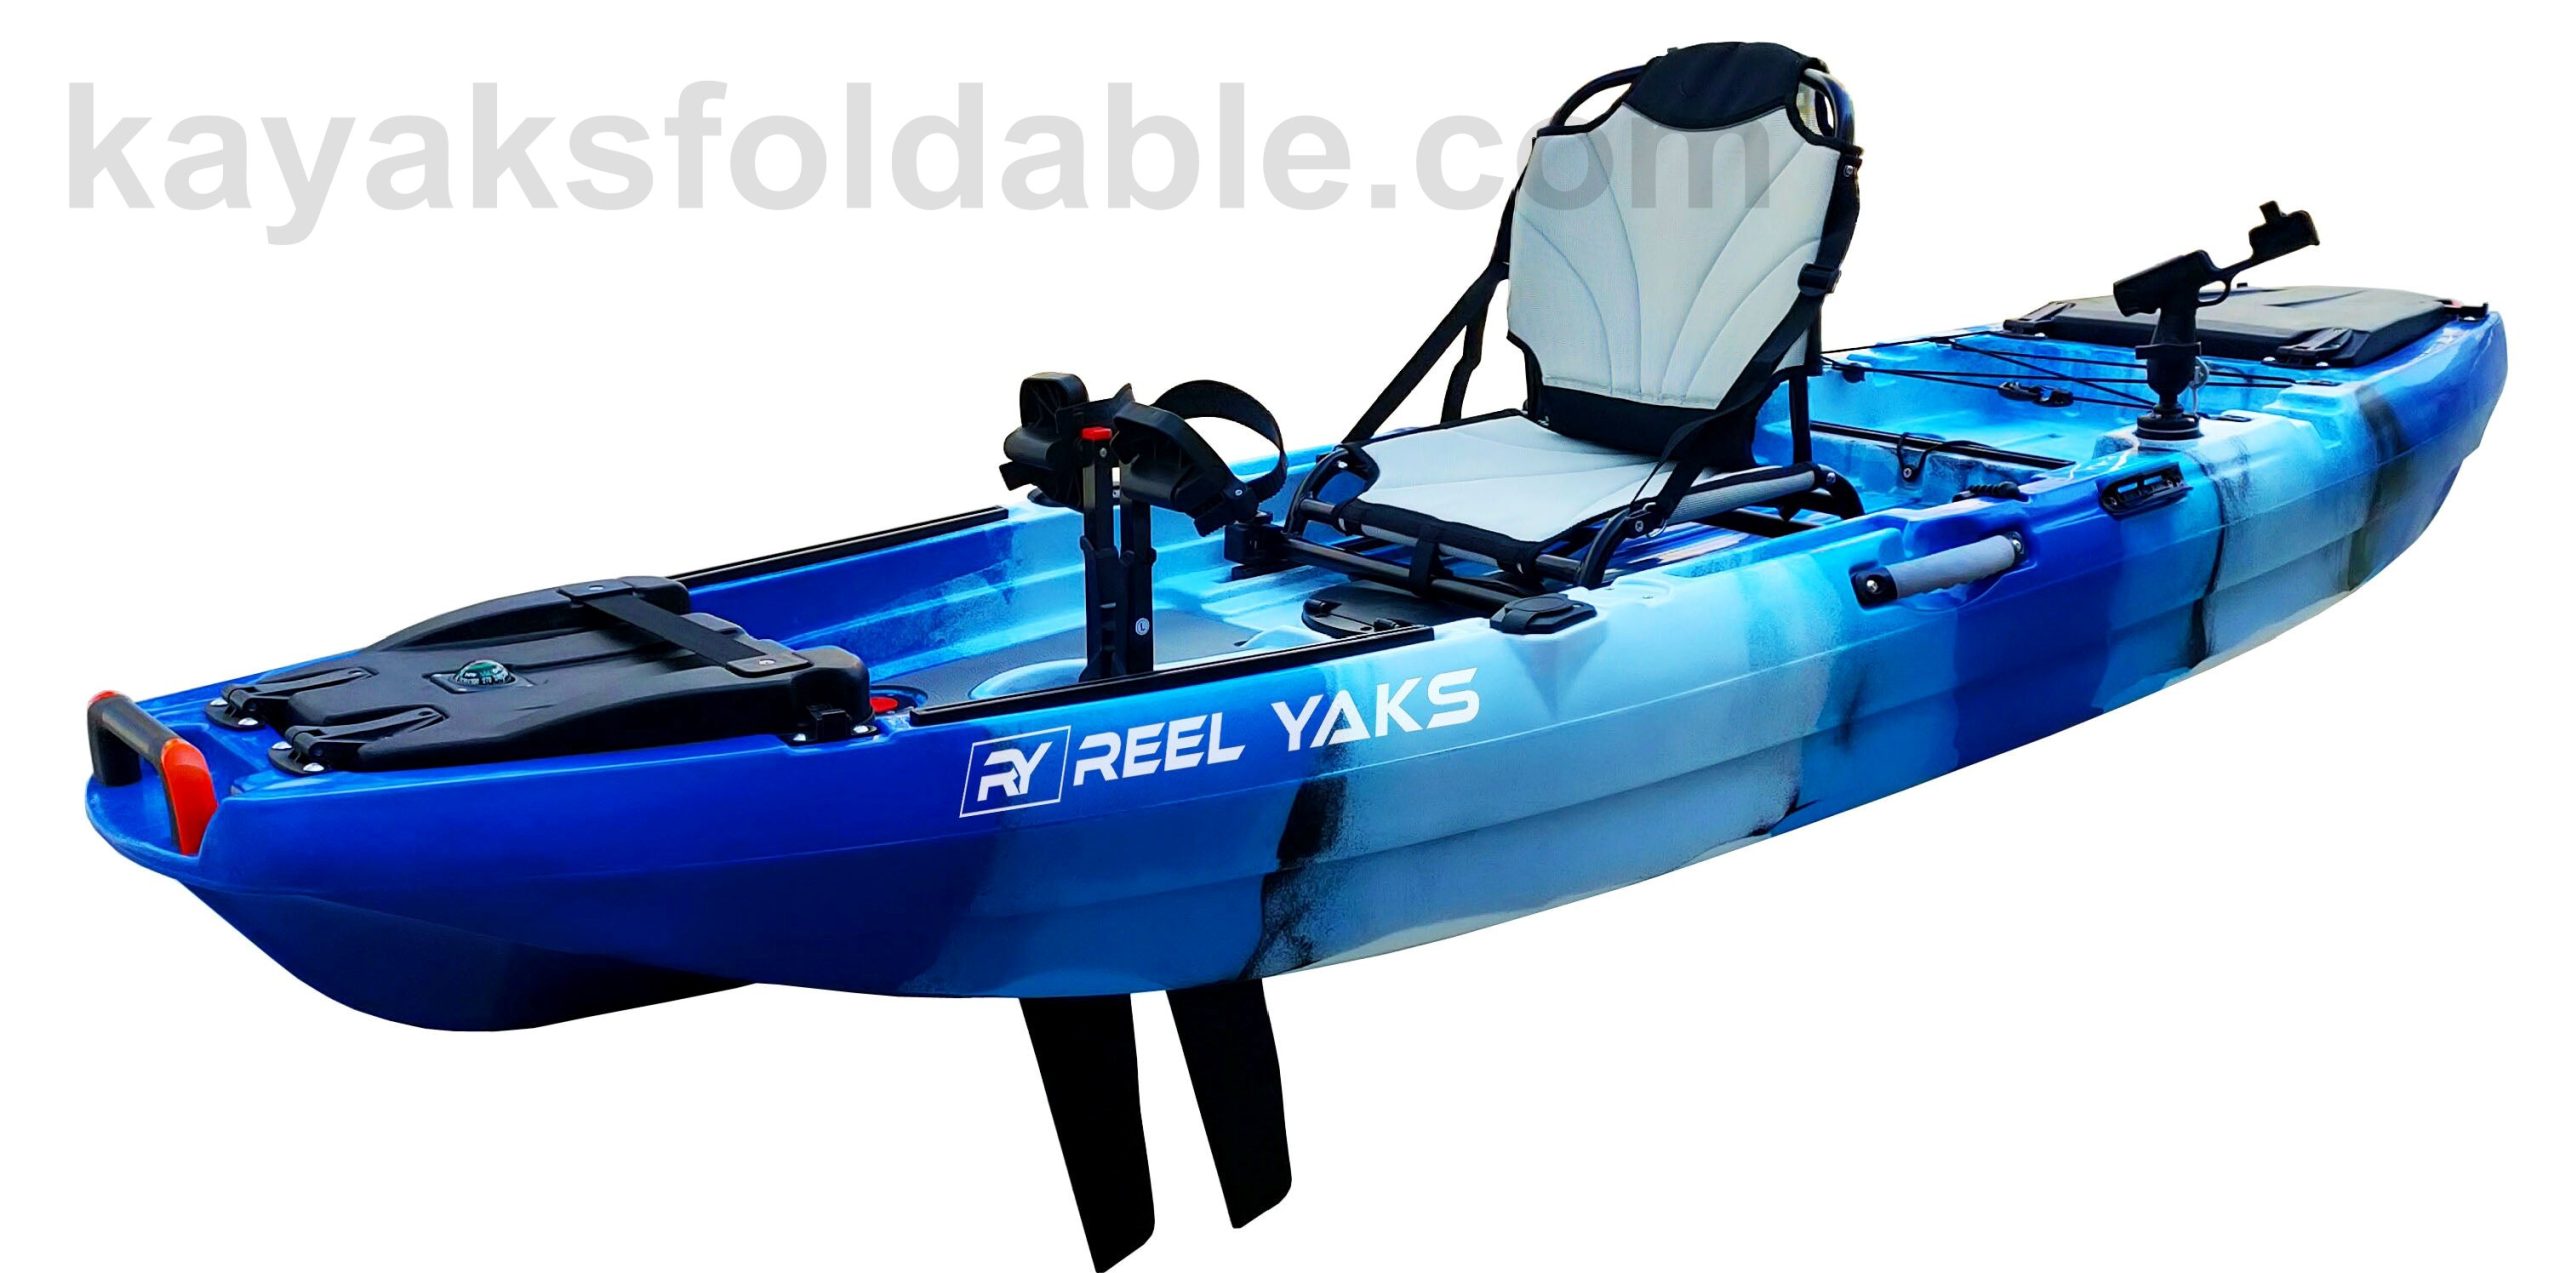 Exquisite 10' Reach Propeller Drive Fishing Kayak, Adults youths kids